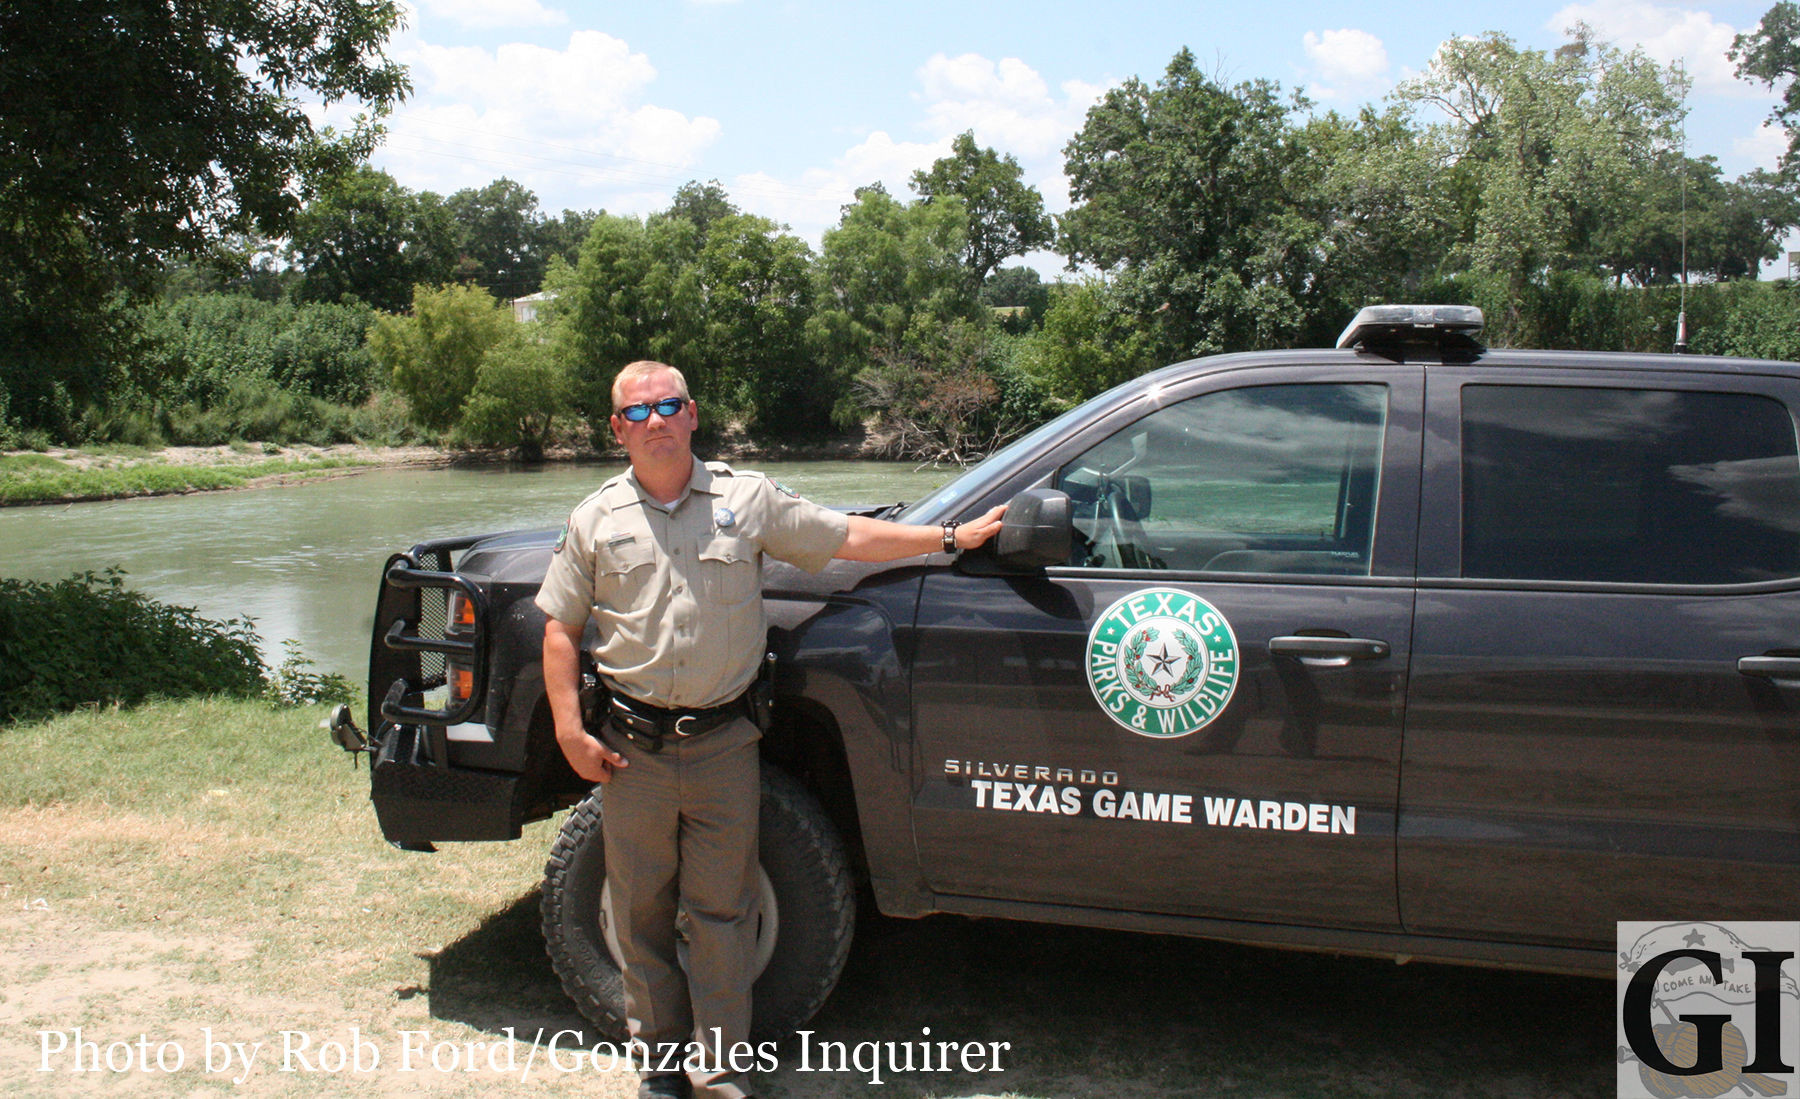 When Dustin Balfanz took the game warden position recently, he knew he was getting to continue making a living working with nature while being closer to family. Balfanz transferred to Gonzales County on June 1, replacing former Game Warden Dan Waddell, and says he’s happy to be here.